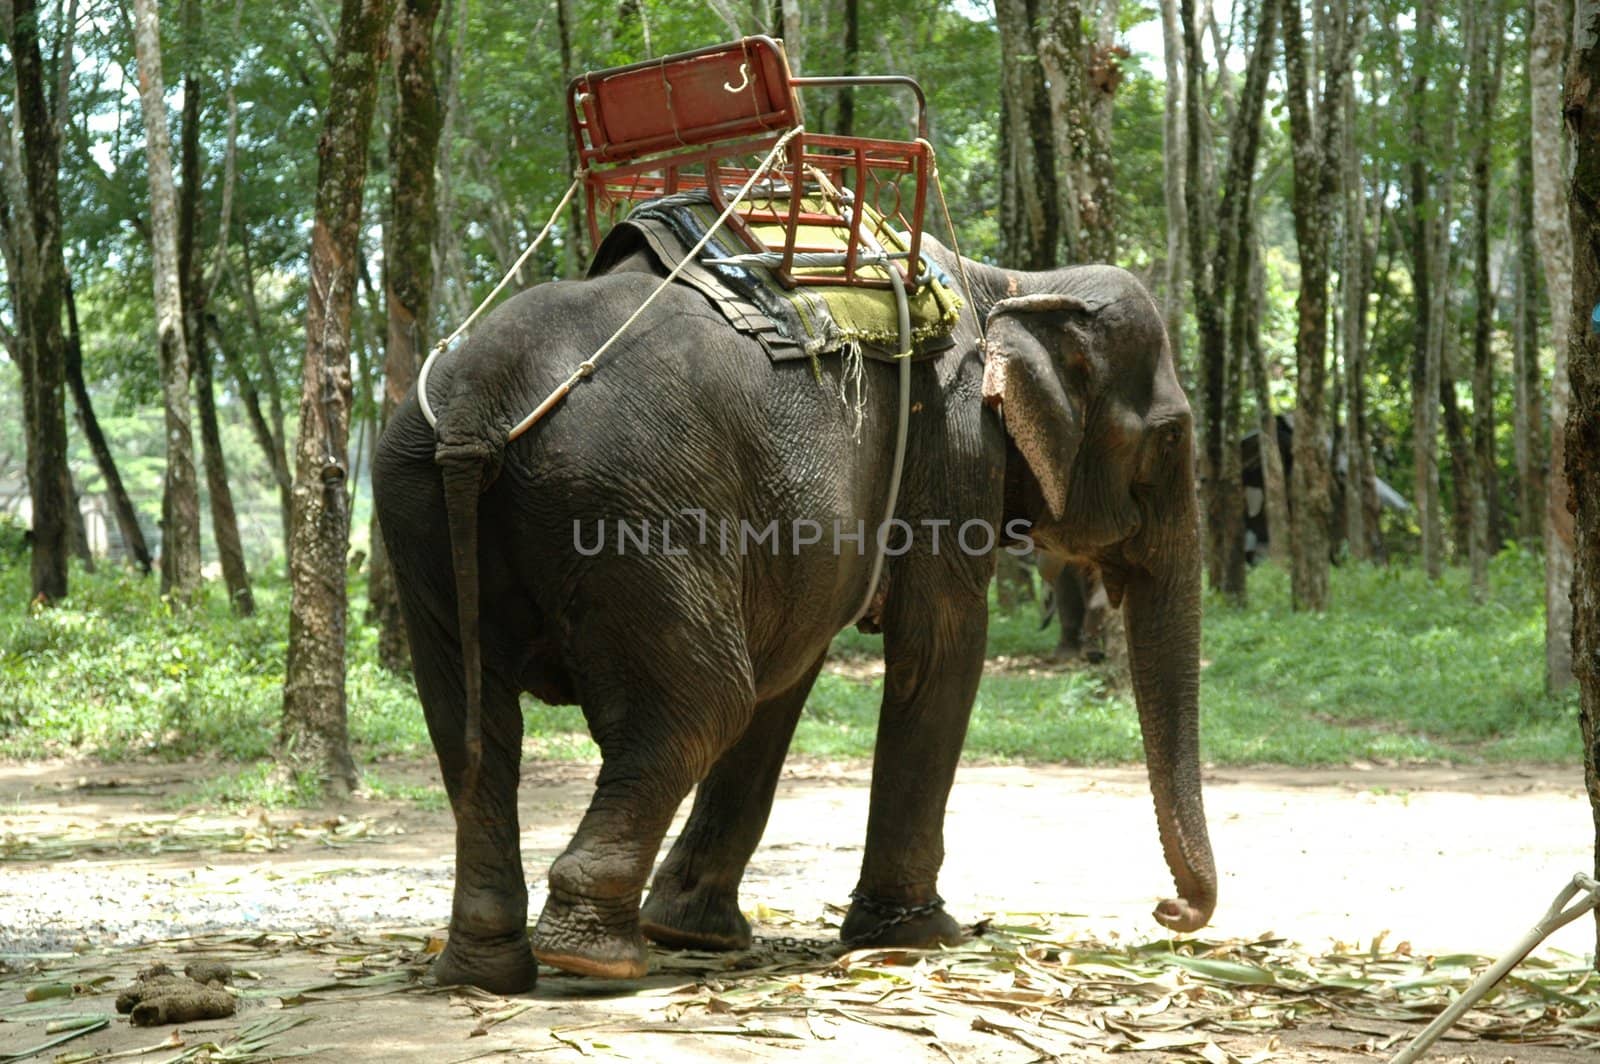 Elephant in Thailand, waiting for customers. The elephant is standing in the jungle.